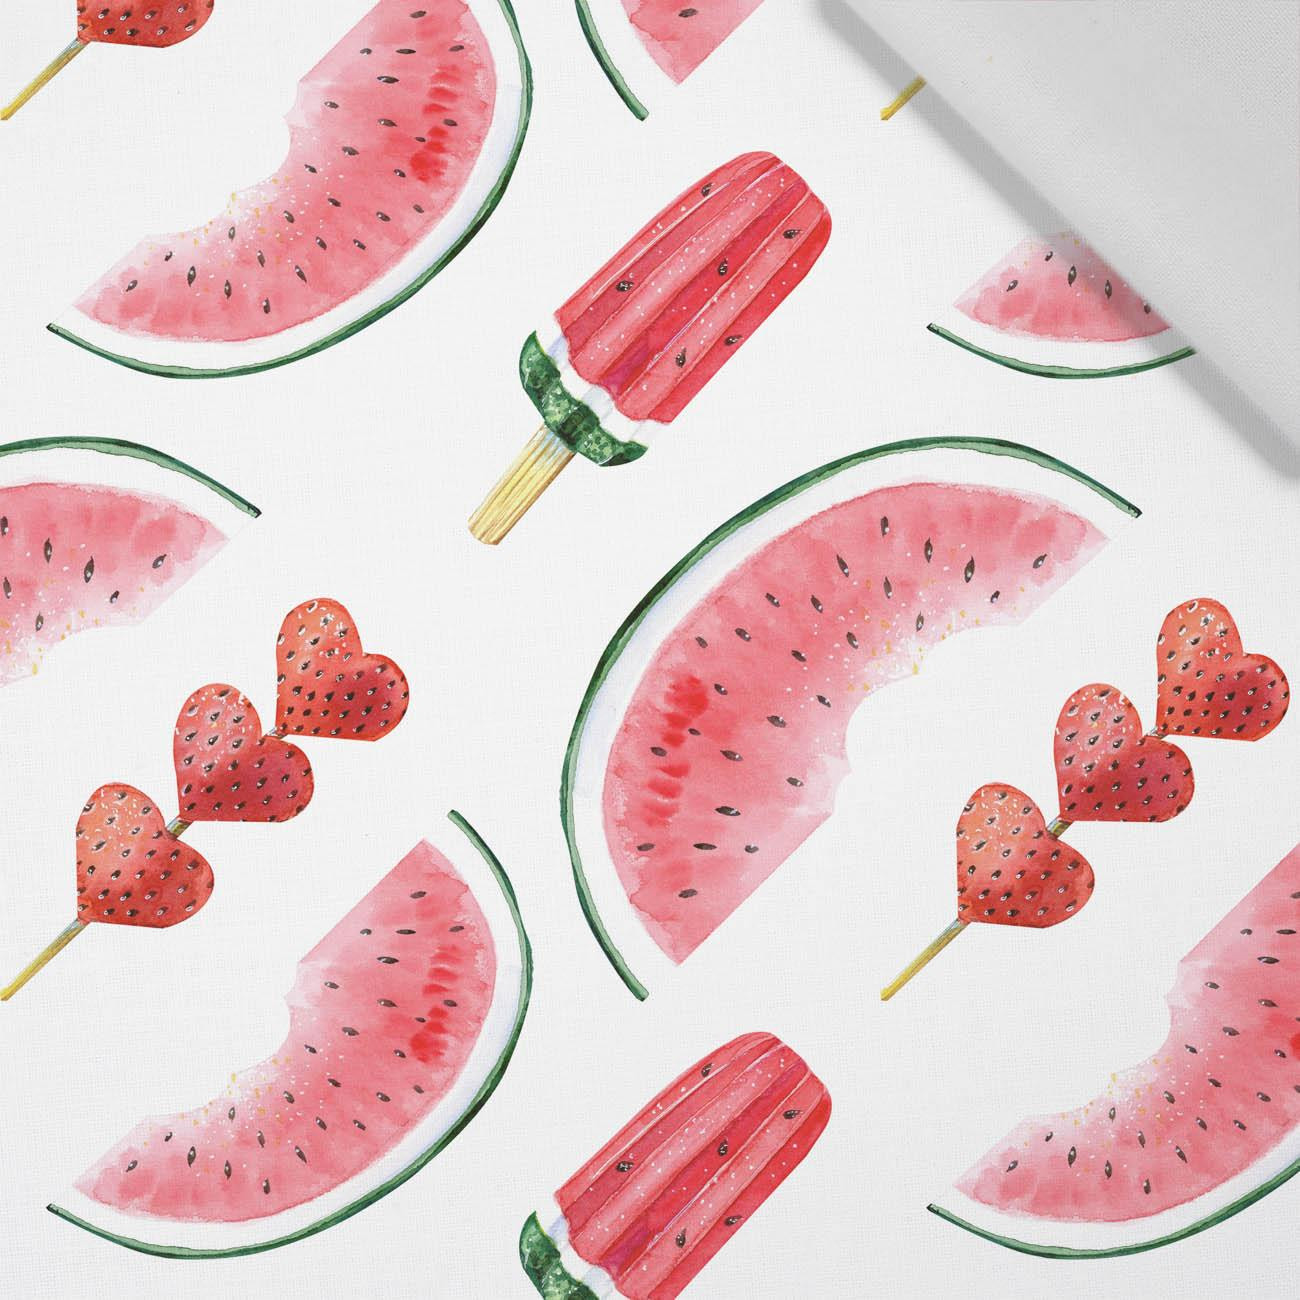 ICE CREAM AND WATERMELONS - Cotton woven fabric